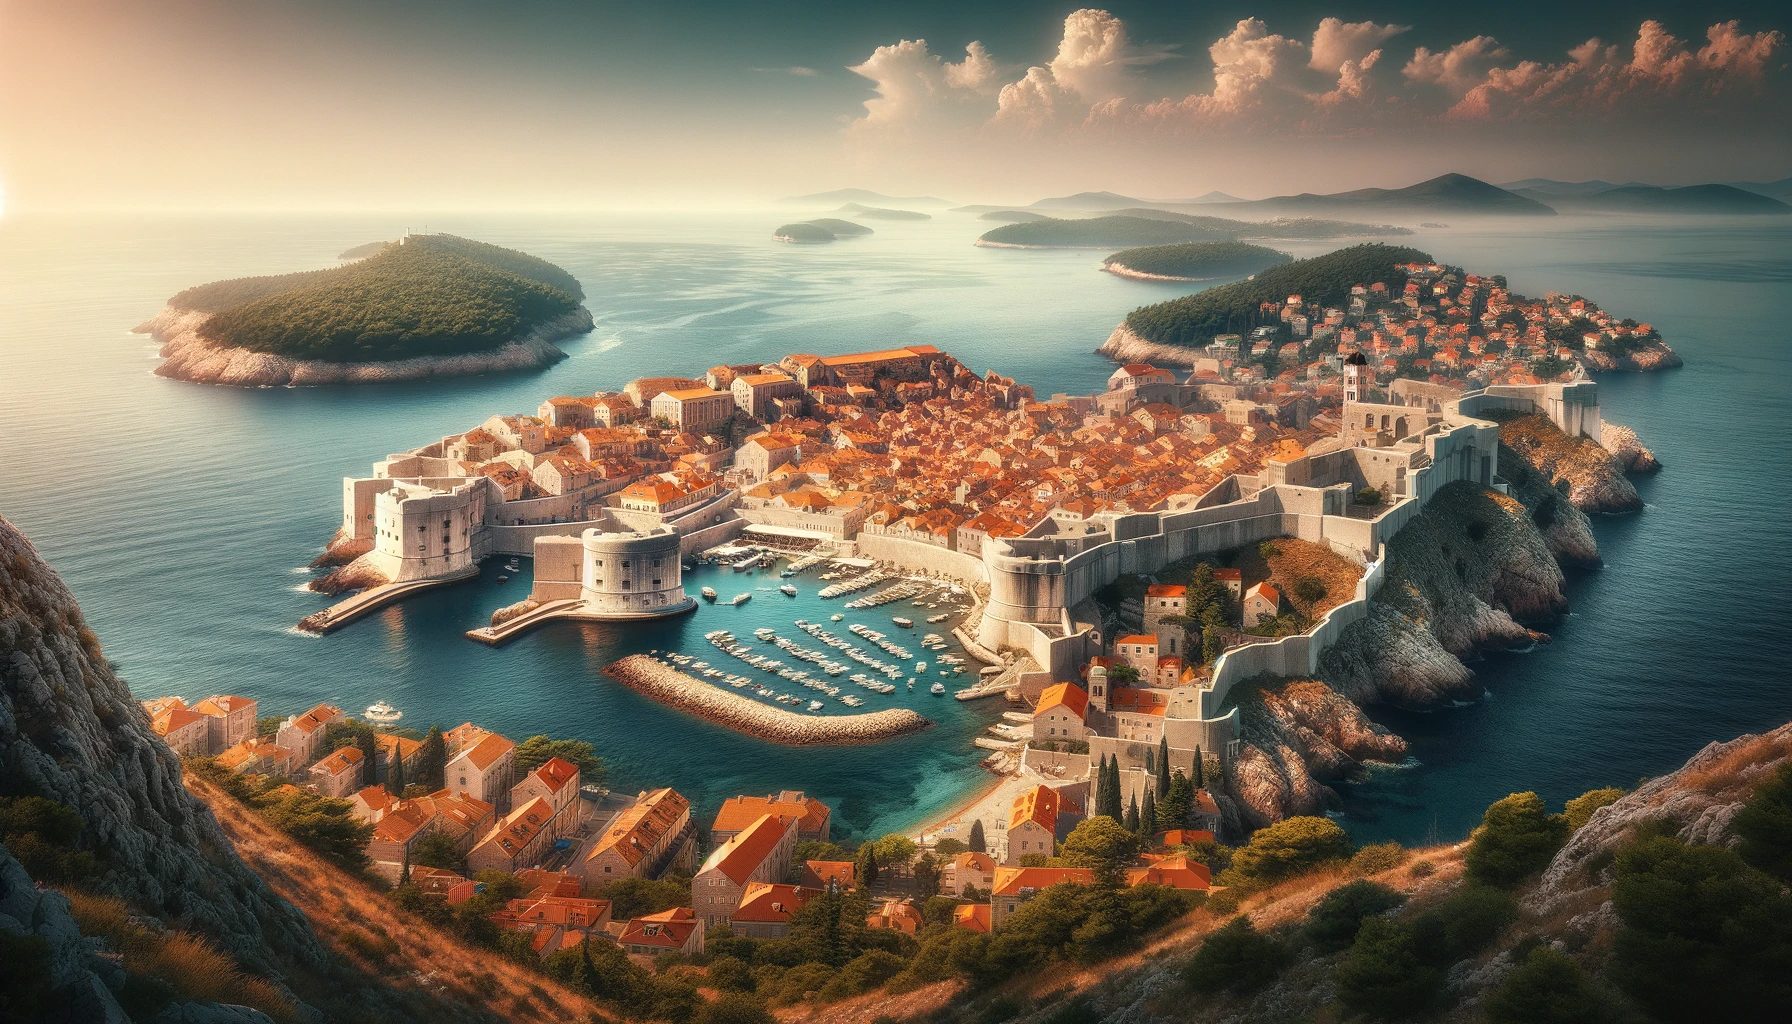 dubrovnik, as generated by Dall-e.